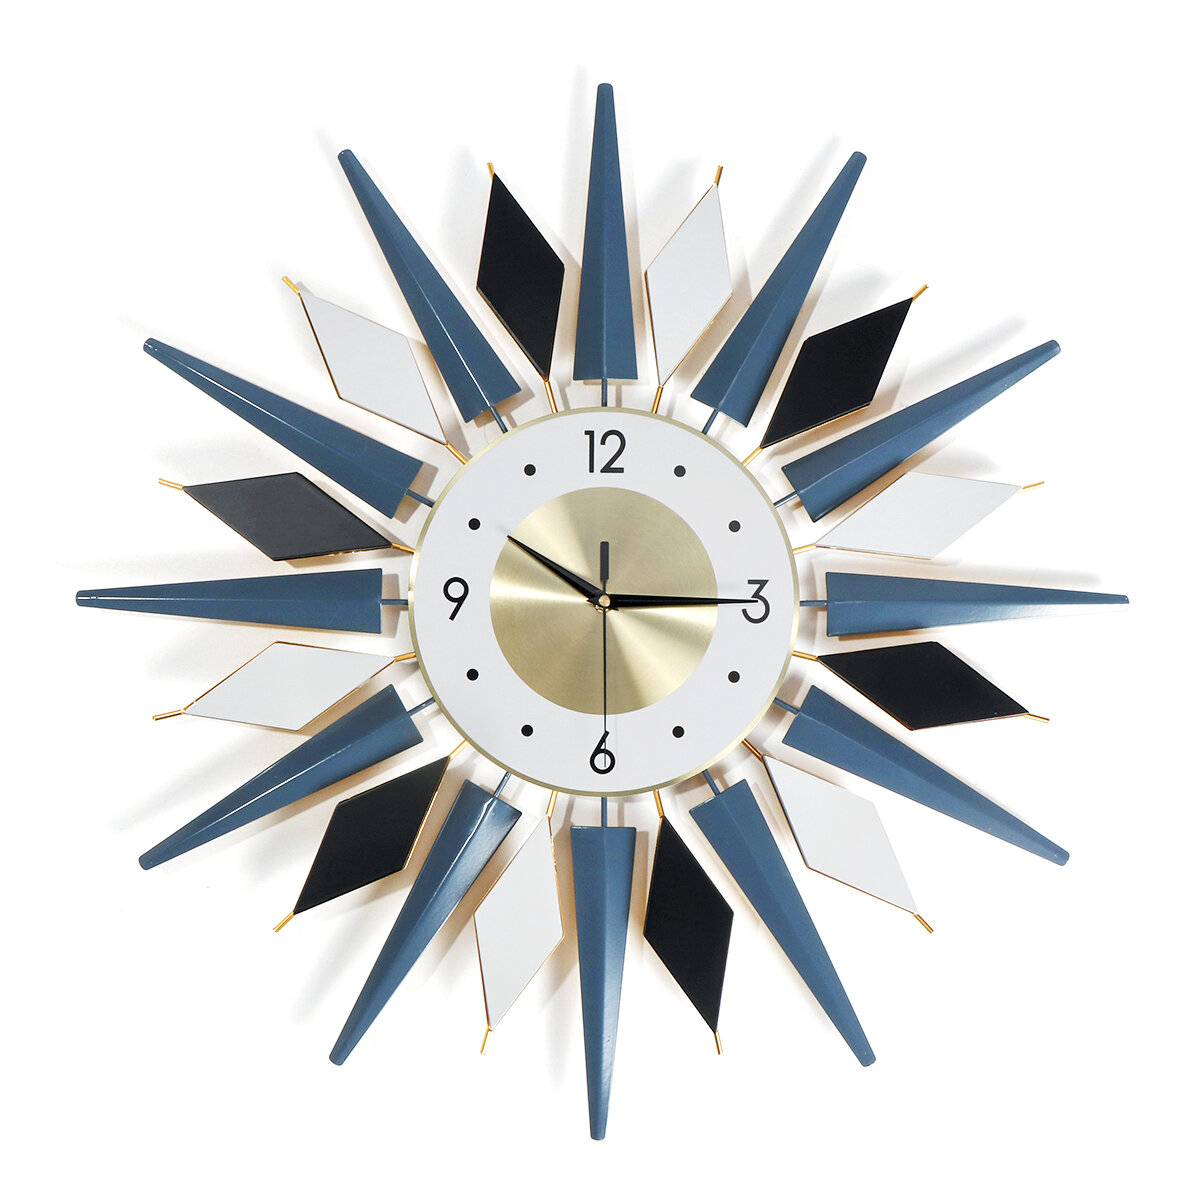 Image of 3D Wall Clock Luxury Metal Diamonds Flower Silent Art Office House Living Room Wall Hanging Clock Decoration Supplies